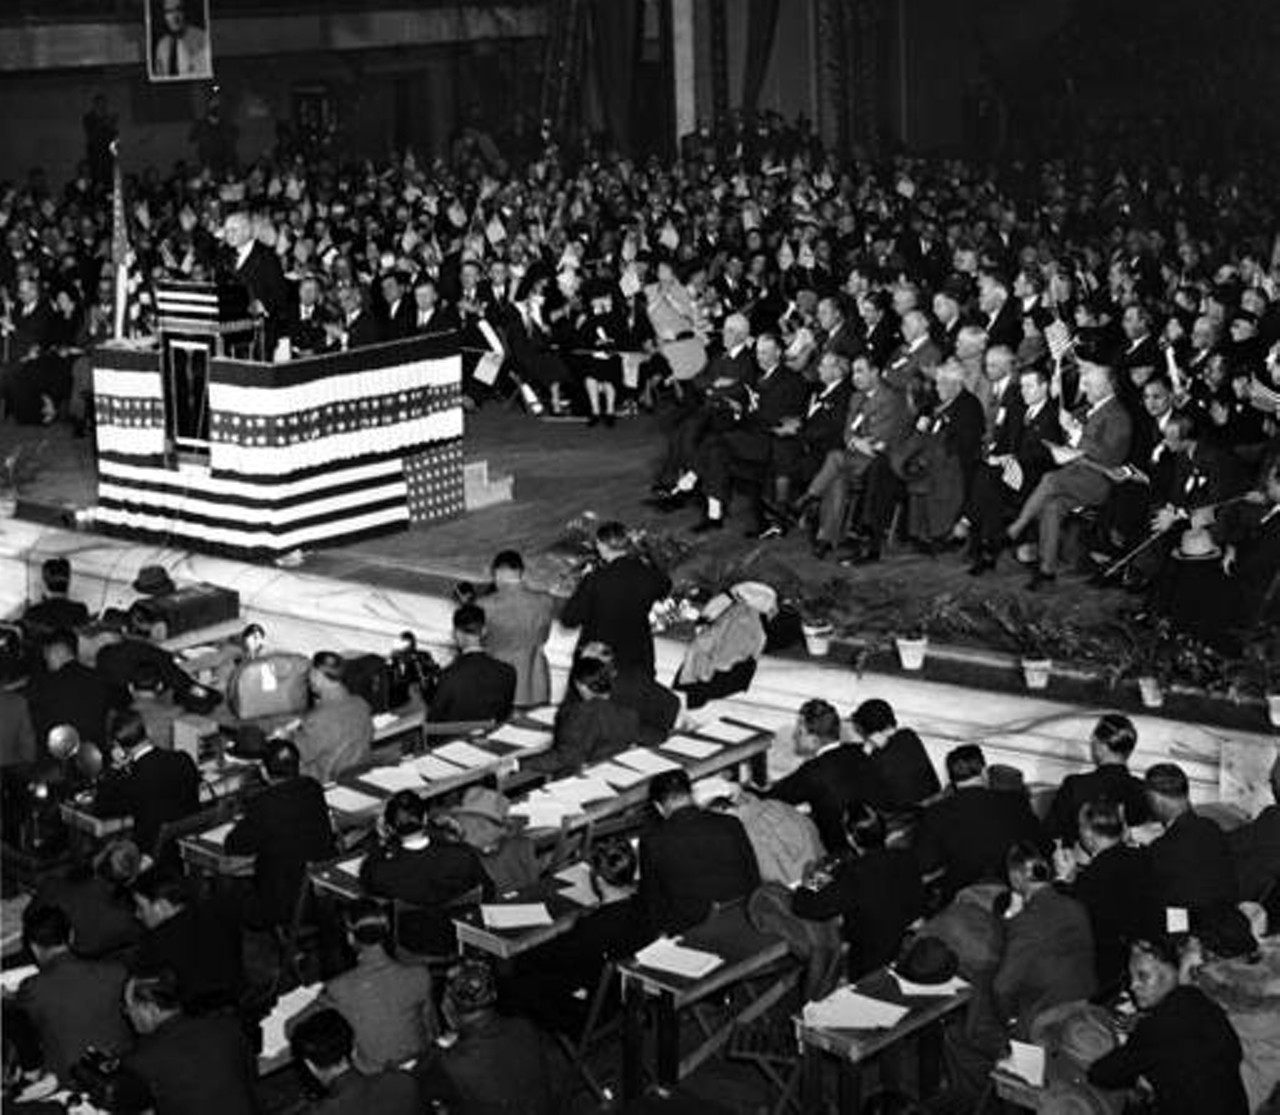 Gov. Landon on Public Hall Stage - Landon, governor of Kansas, was the Republican nominee for U.S. President in 1936. He was defeated by Franklin D. Roosevelt.